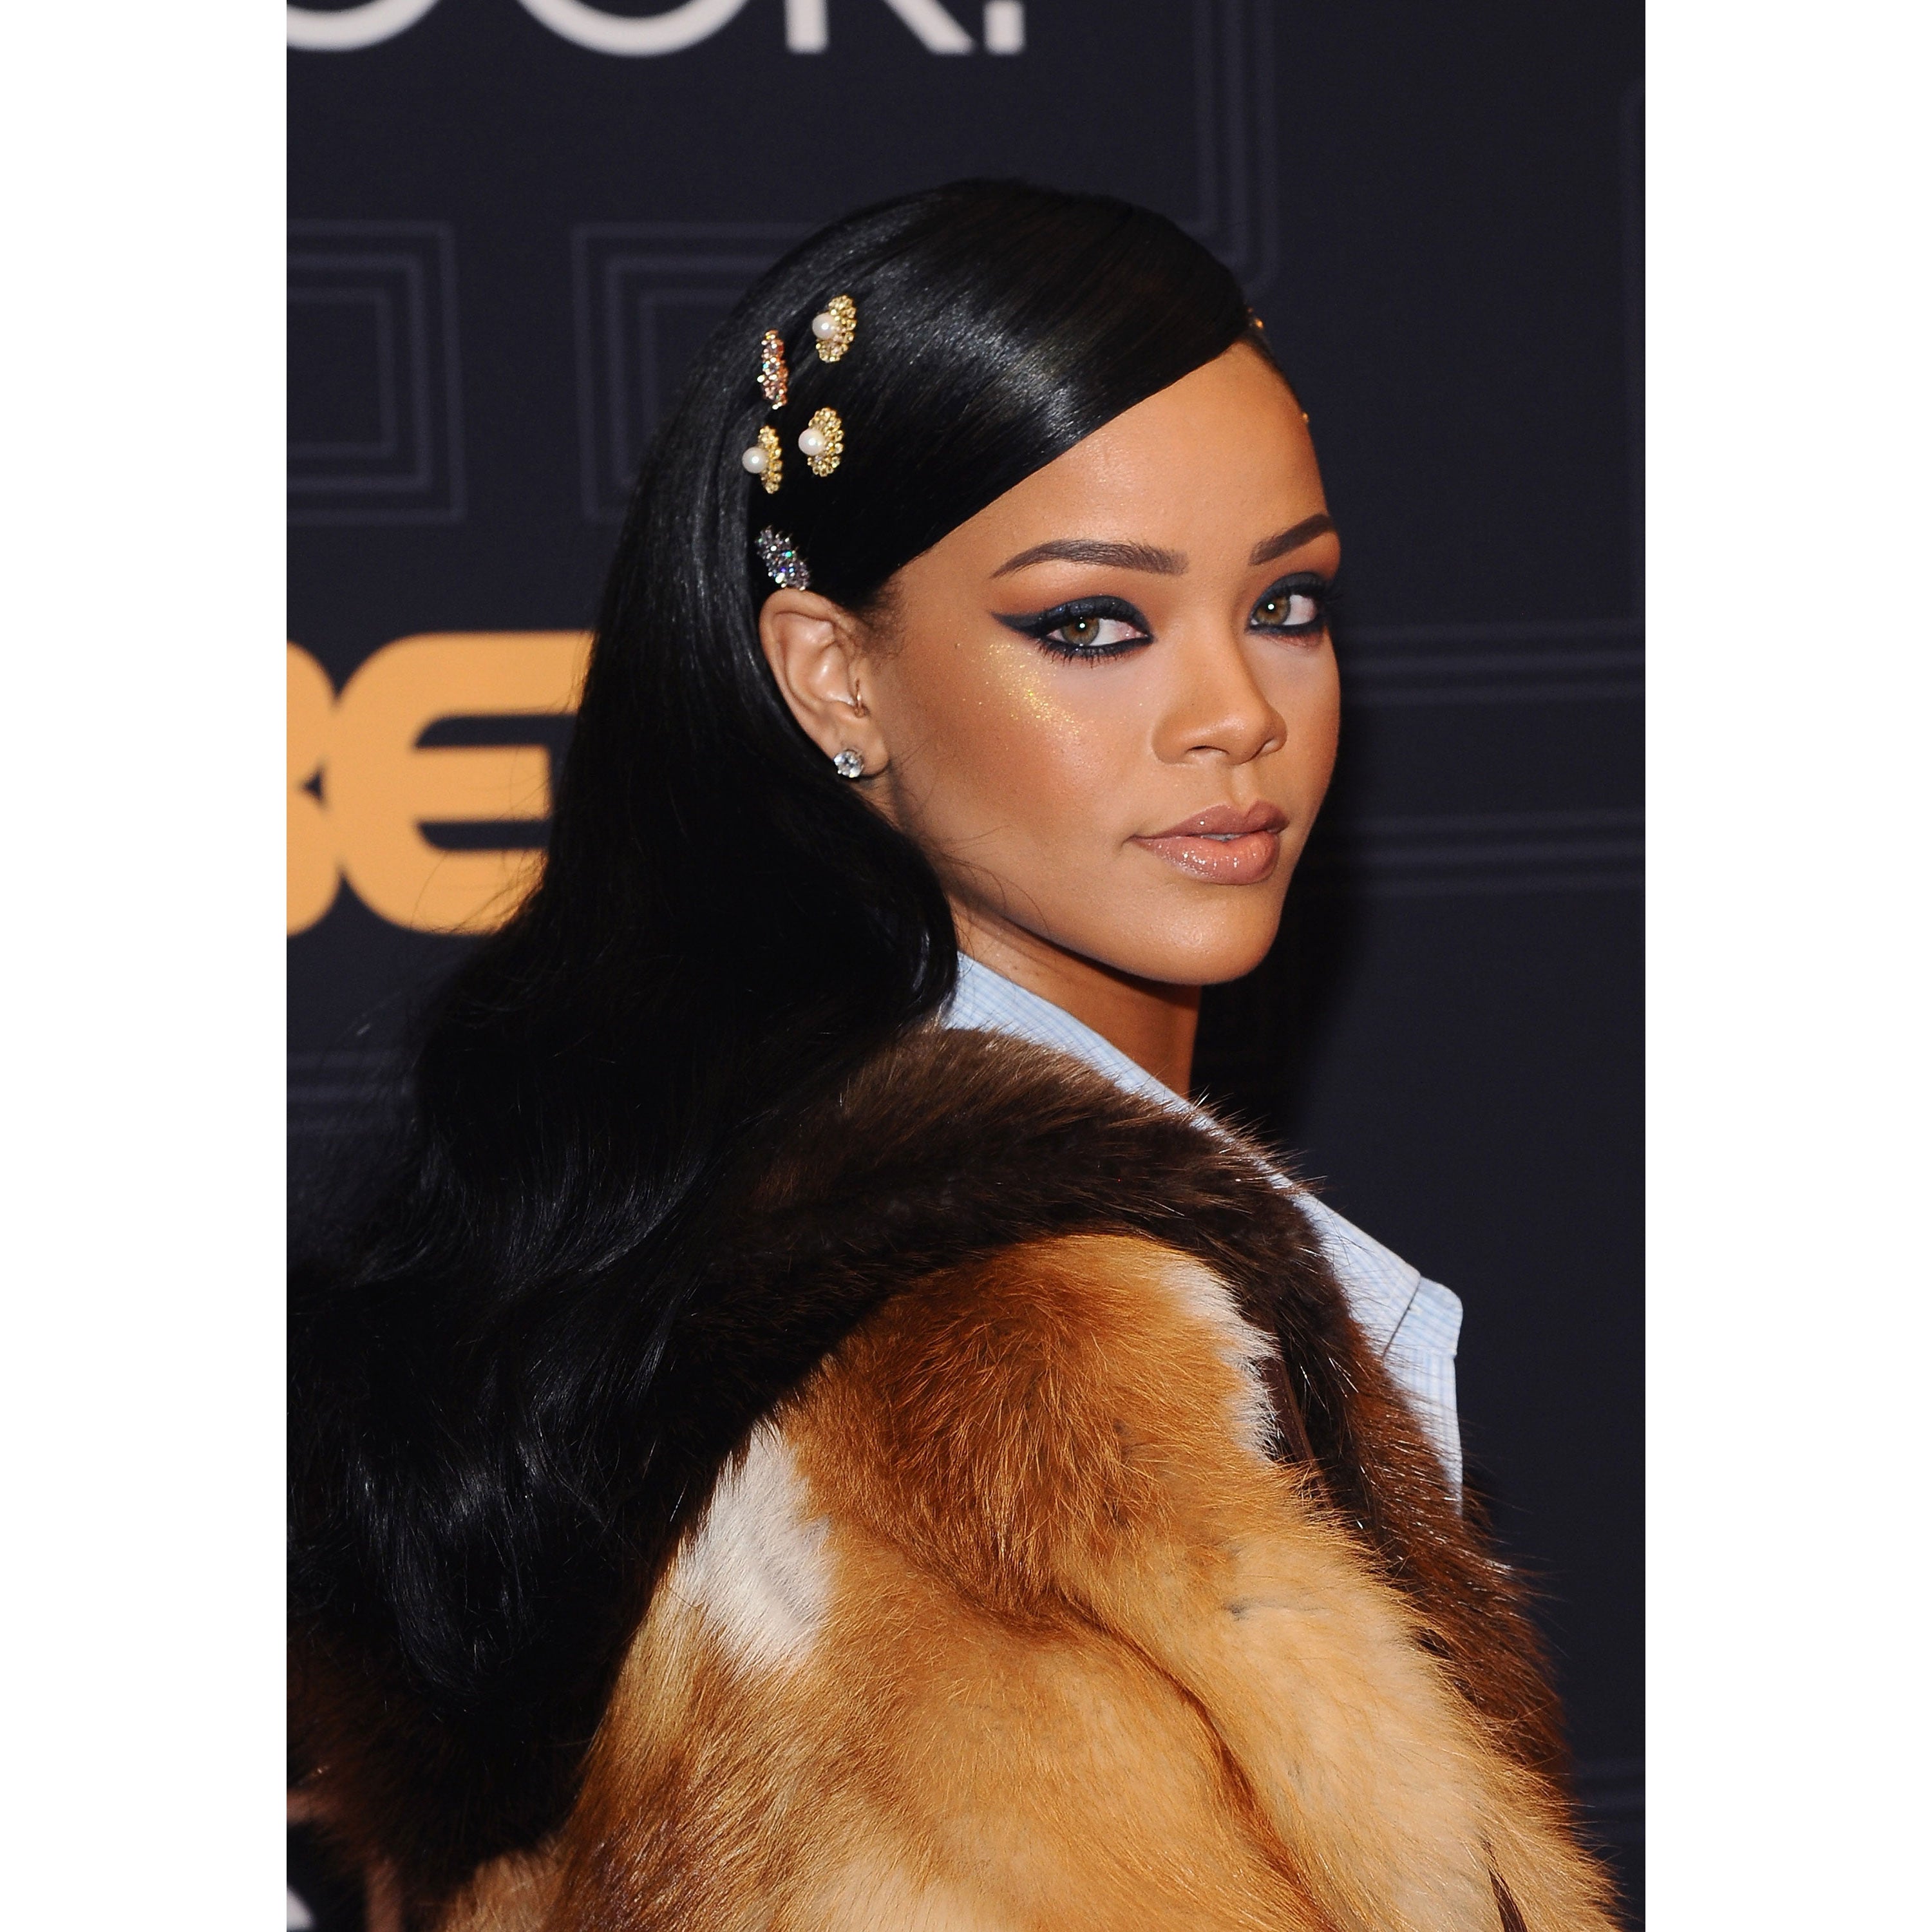 15 Beauty Items We Want To See From Rihanna’s Makeup Line
